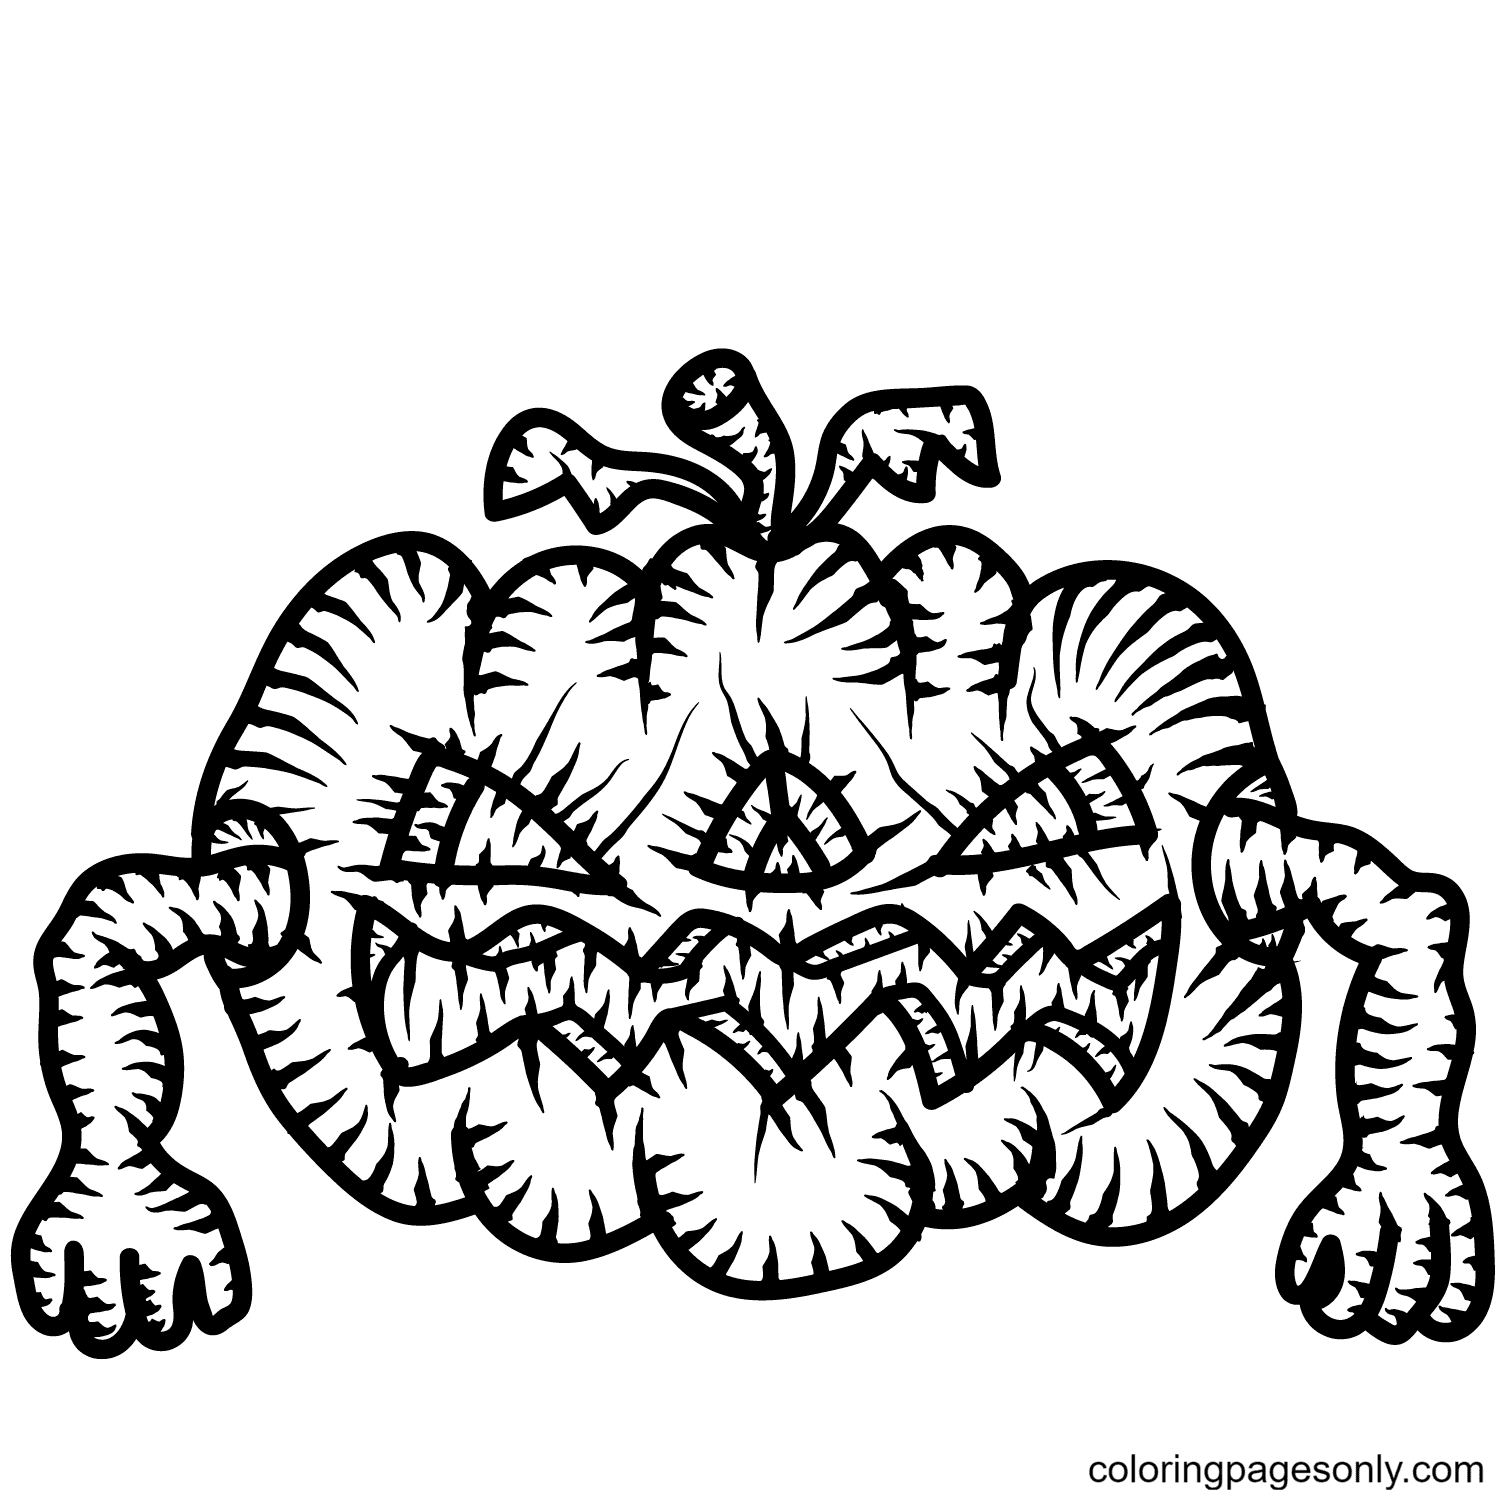 Scary Jack-o'-Lantern Coloring Pages